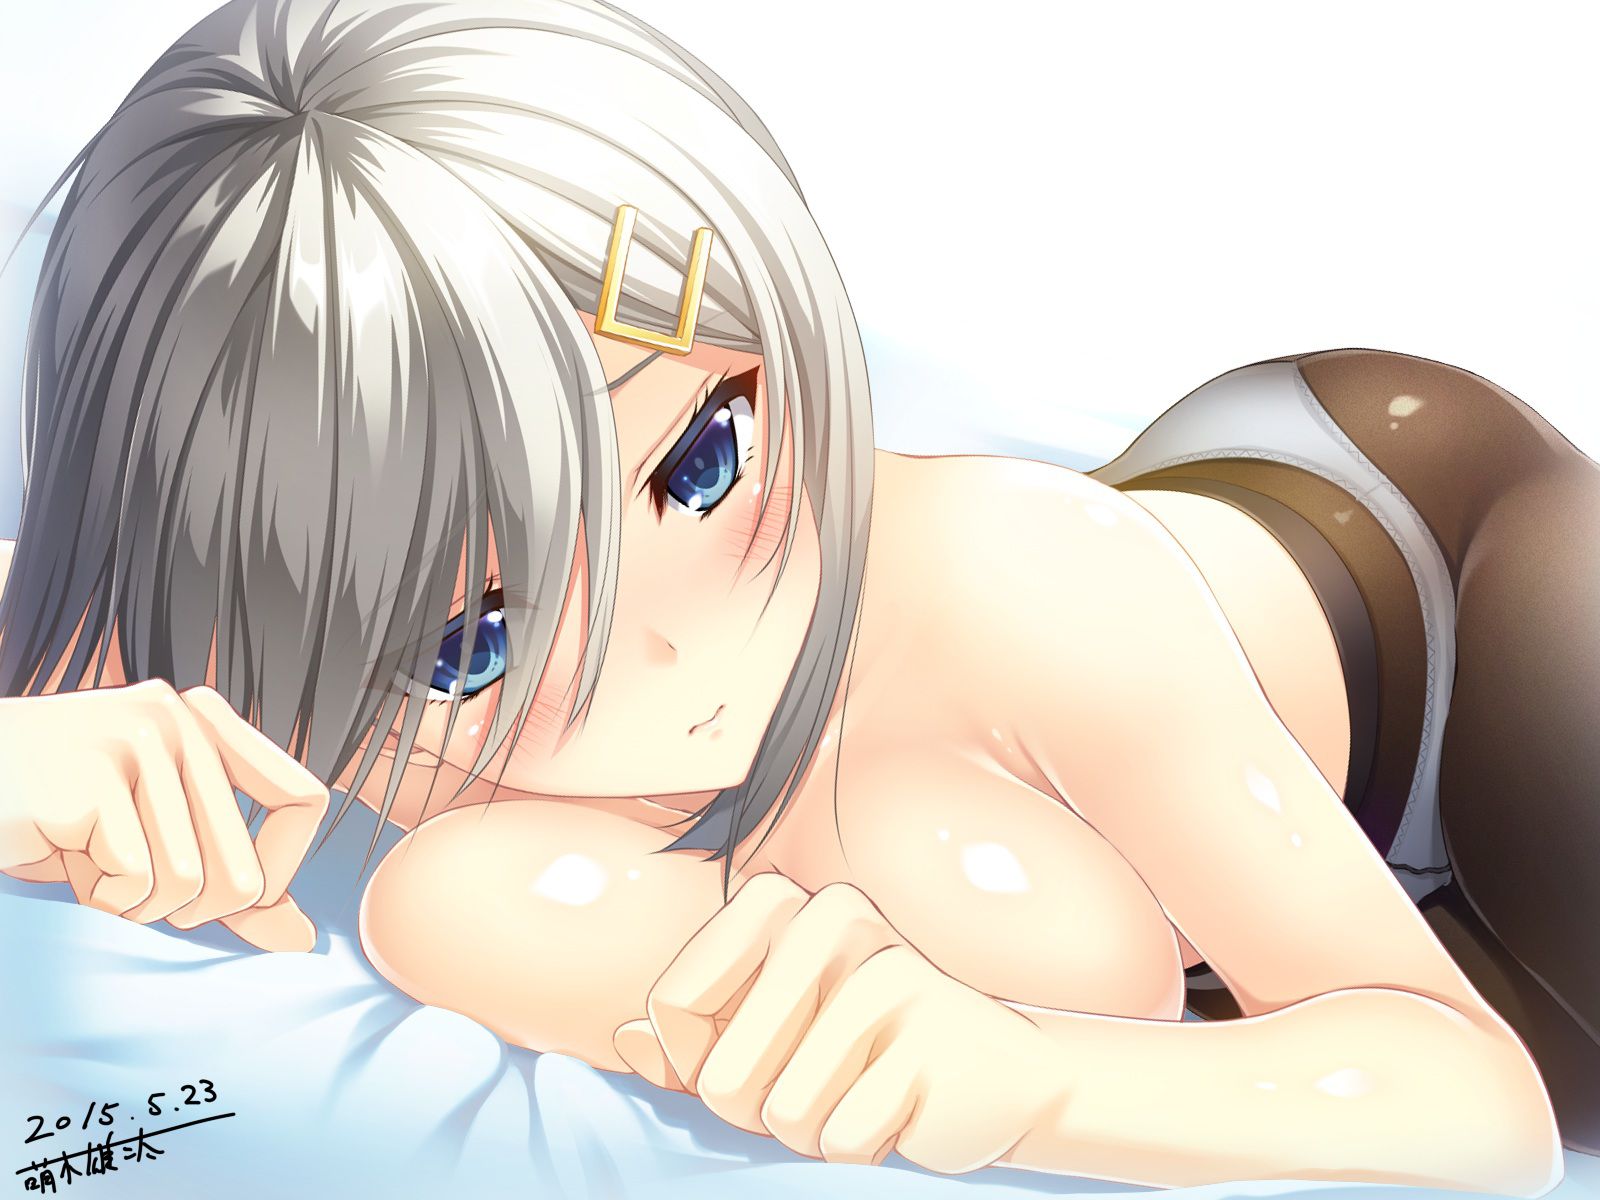 [Ship it] hamakaze erotic pictures so this overwhelming cuteness! 9